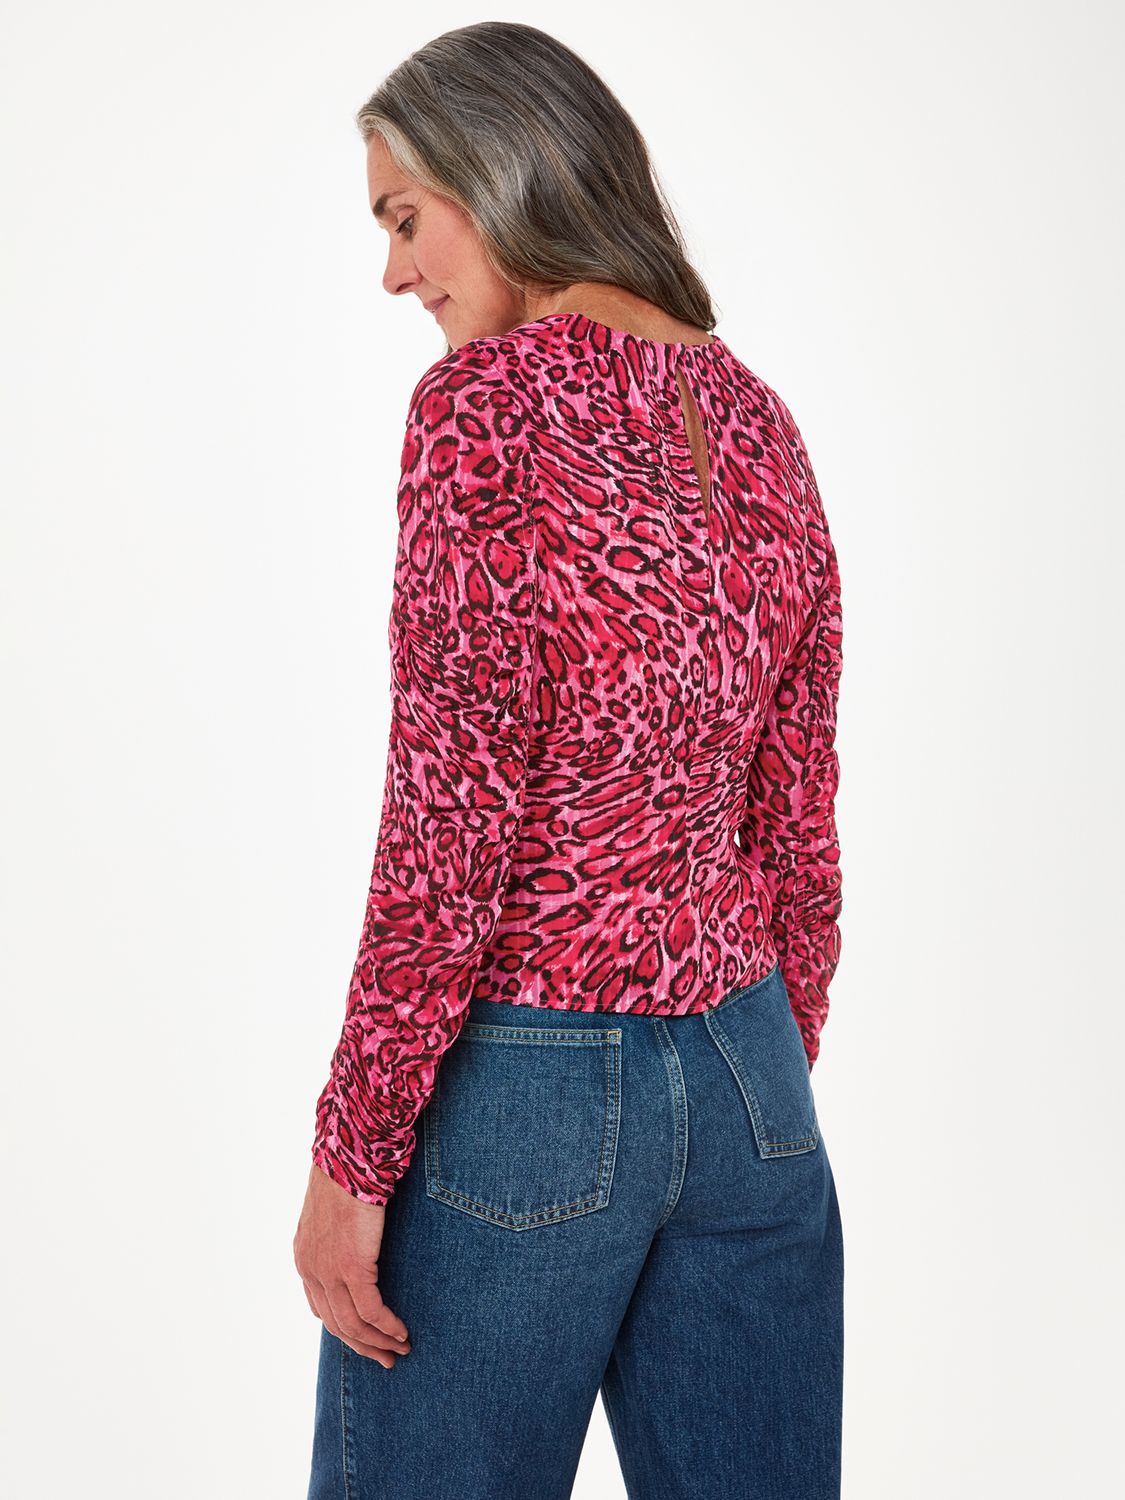 Buy Whistles Waving Leopard Gathered Top, Pink/Multi Online at johnlewis.com